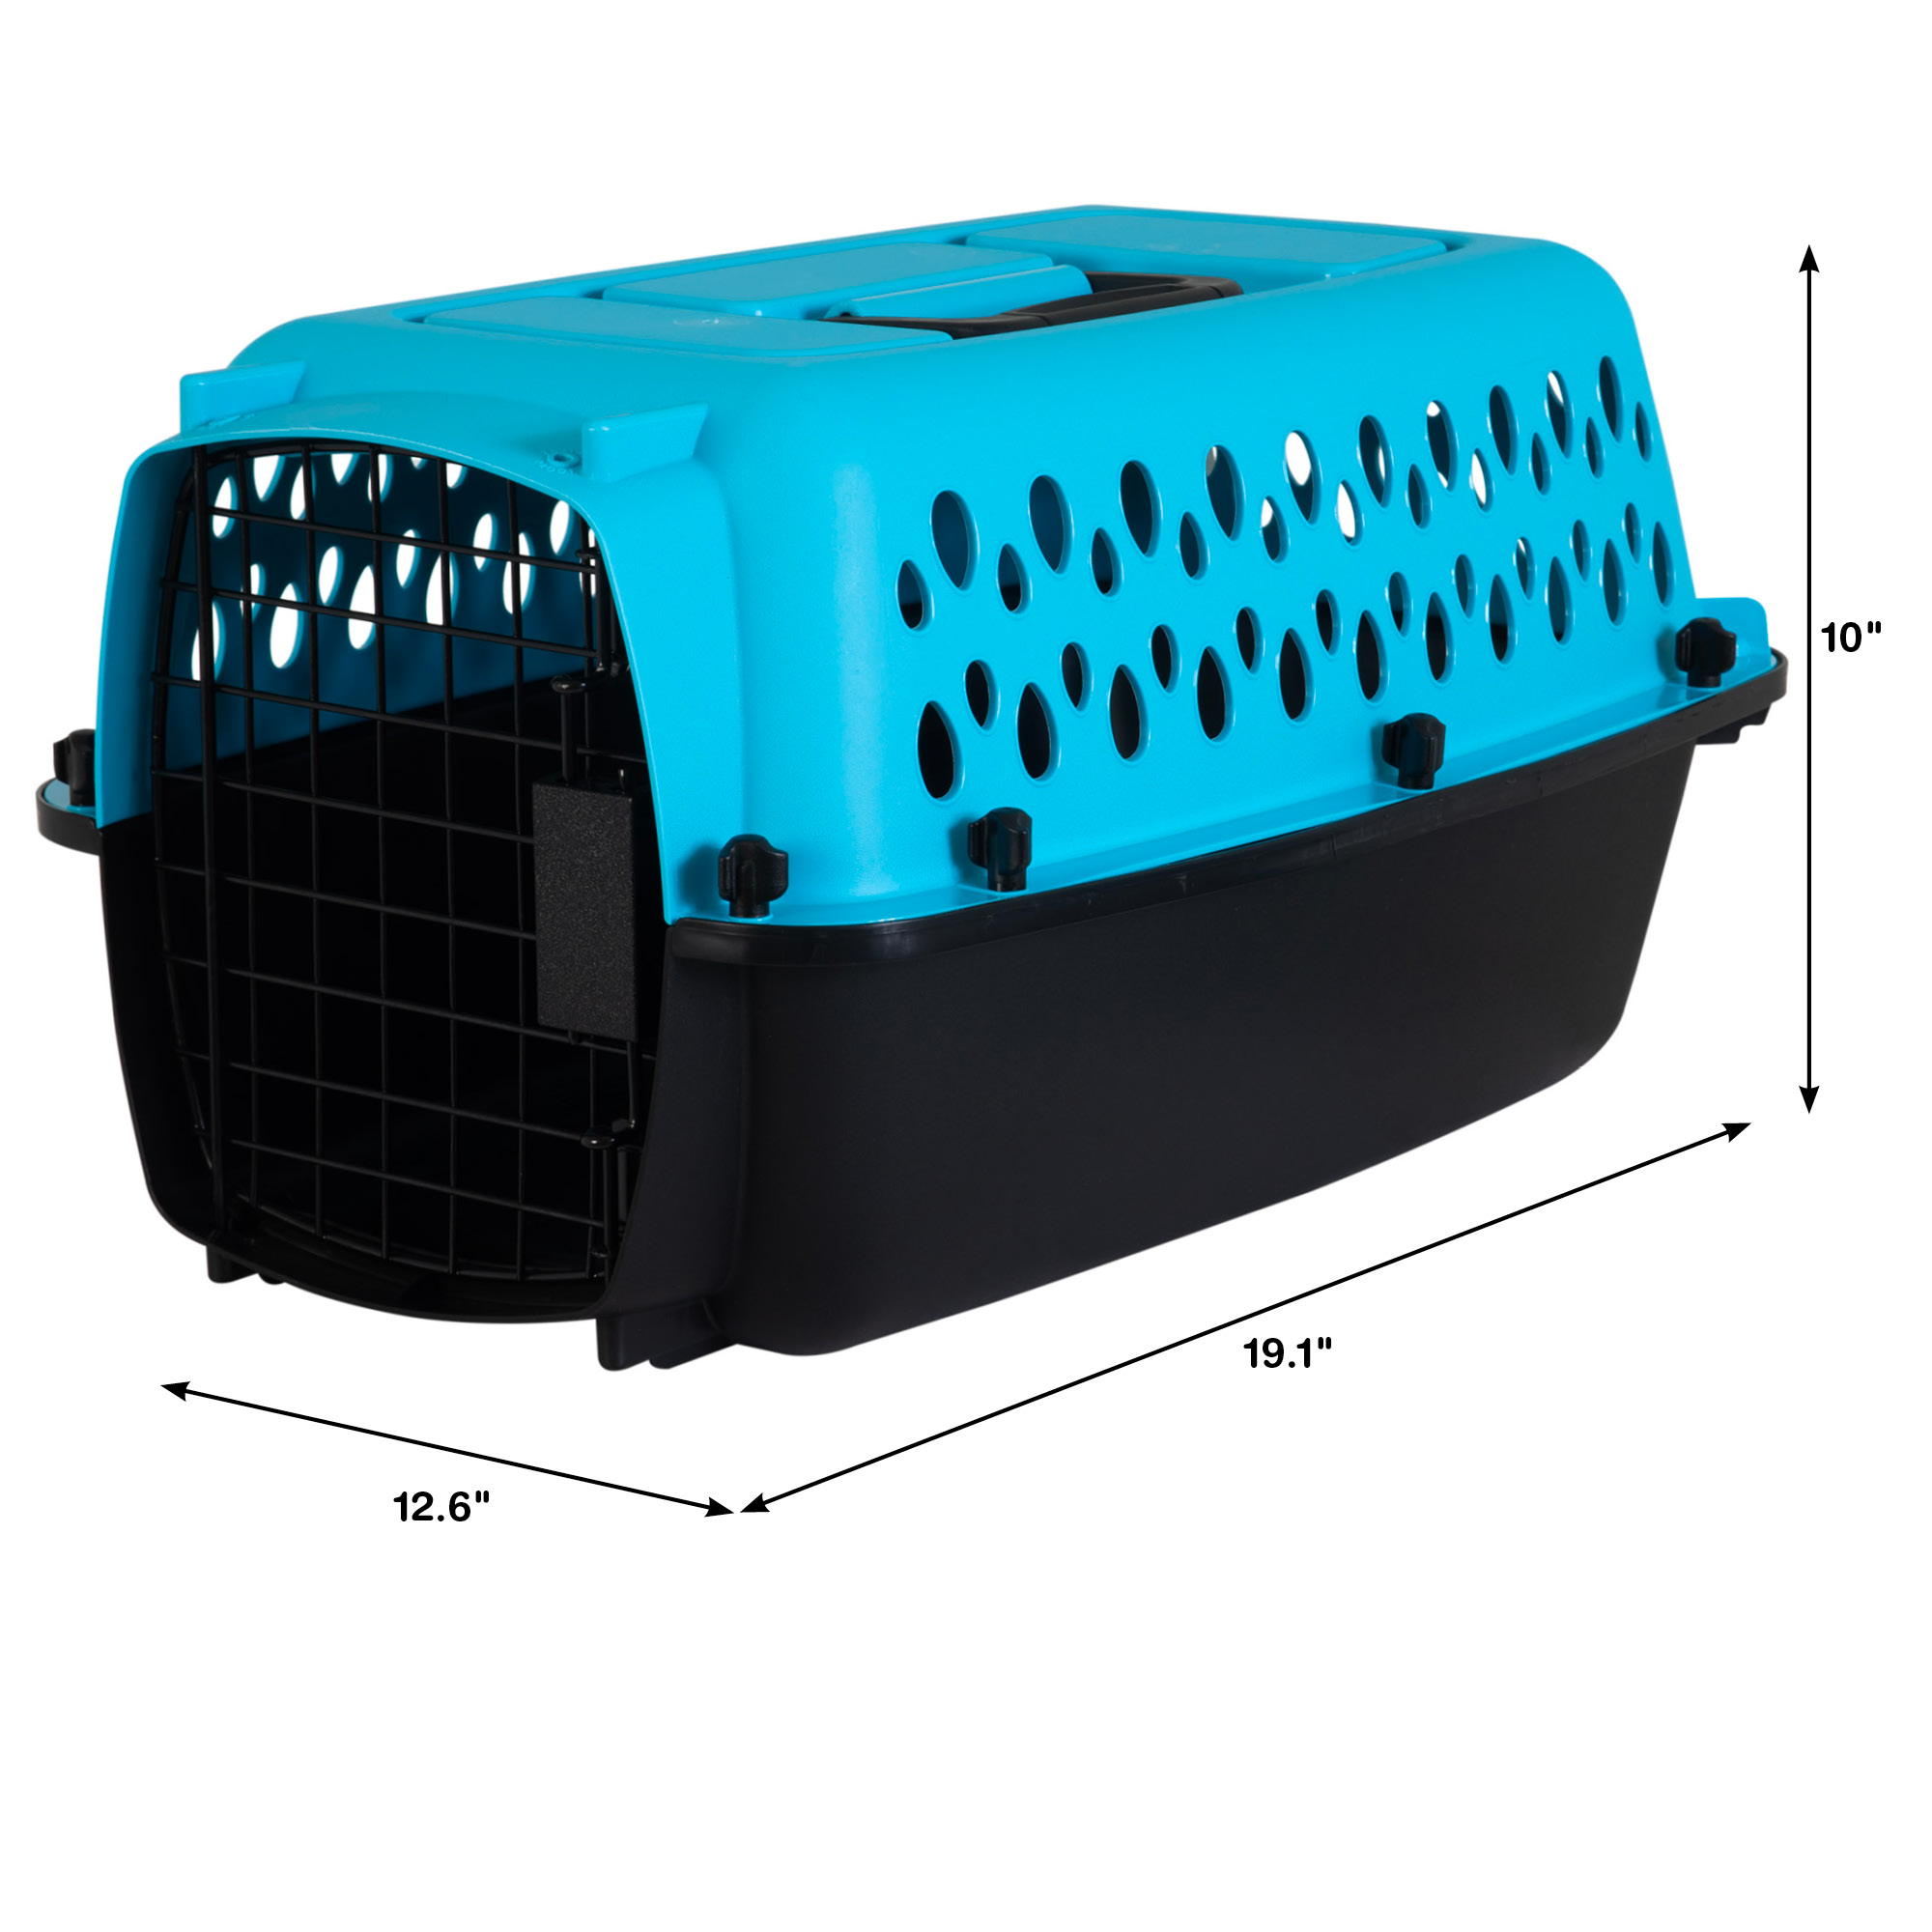 Petmate Pet Porter 19" Travel Fashion Dog Kennel Portable Small Pet Carrier for Dogs Upto 10 lb, Blue - image 3 of 8